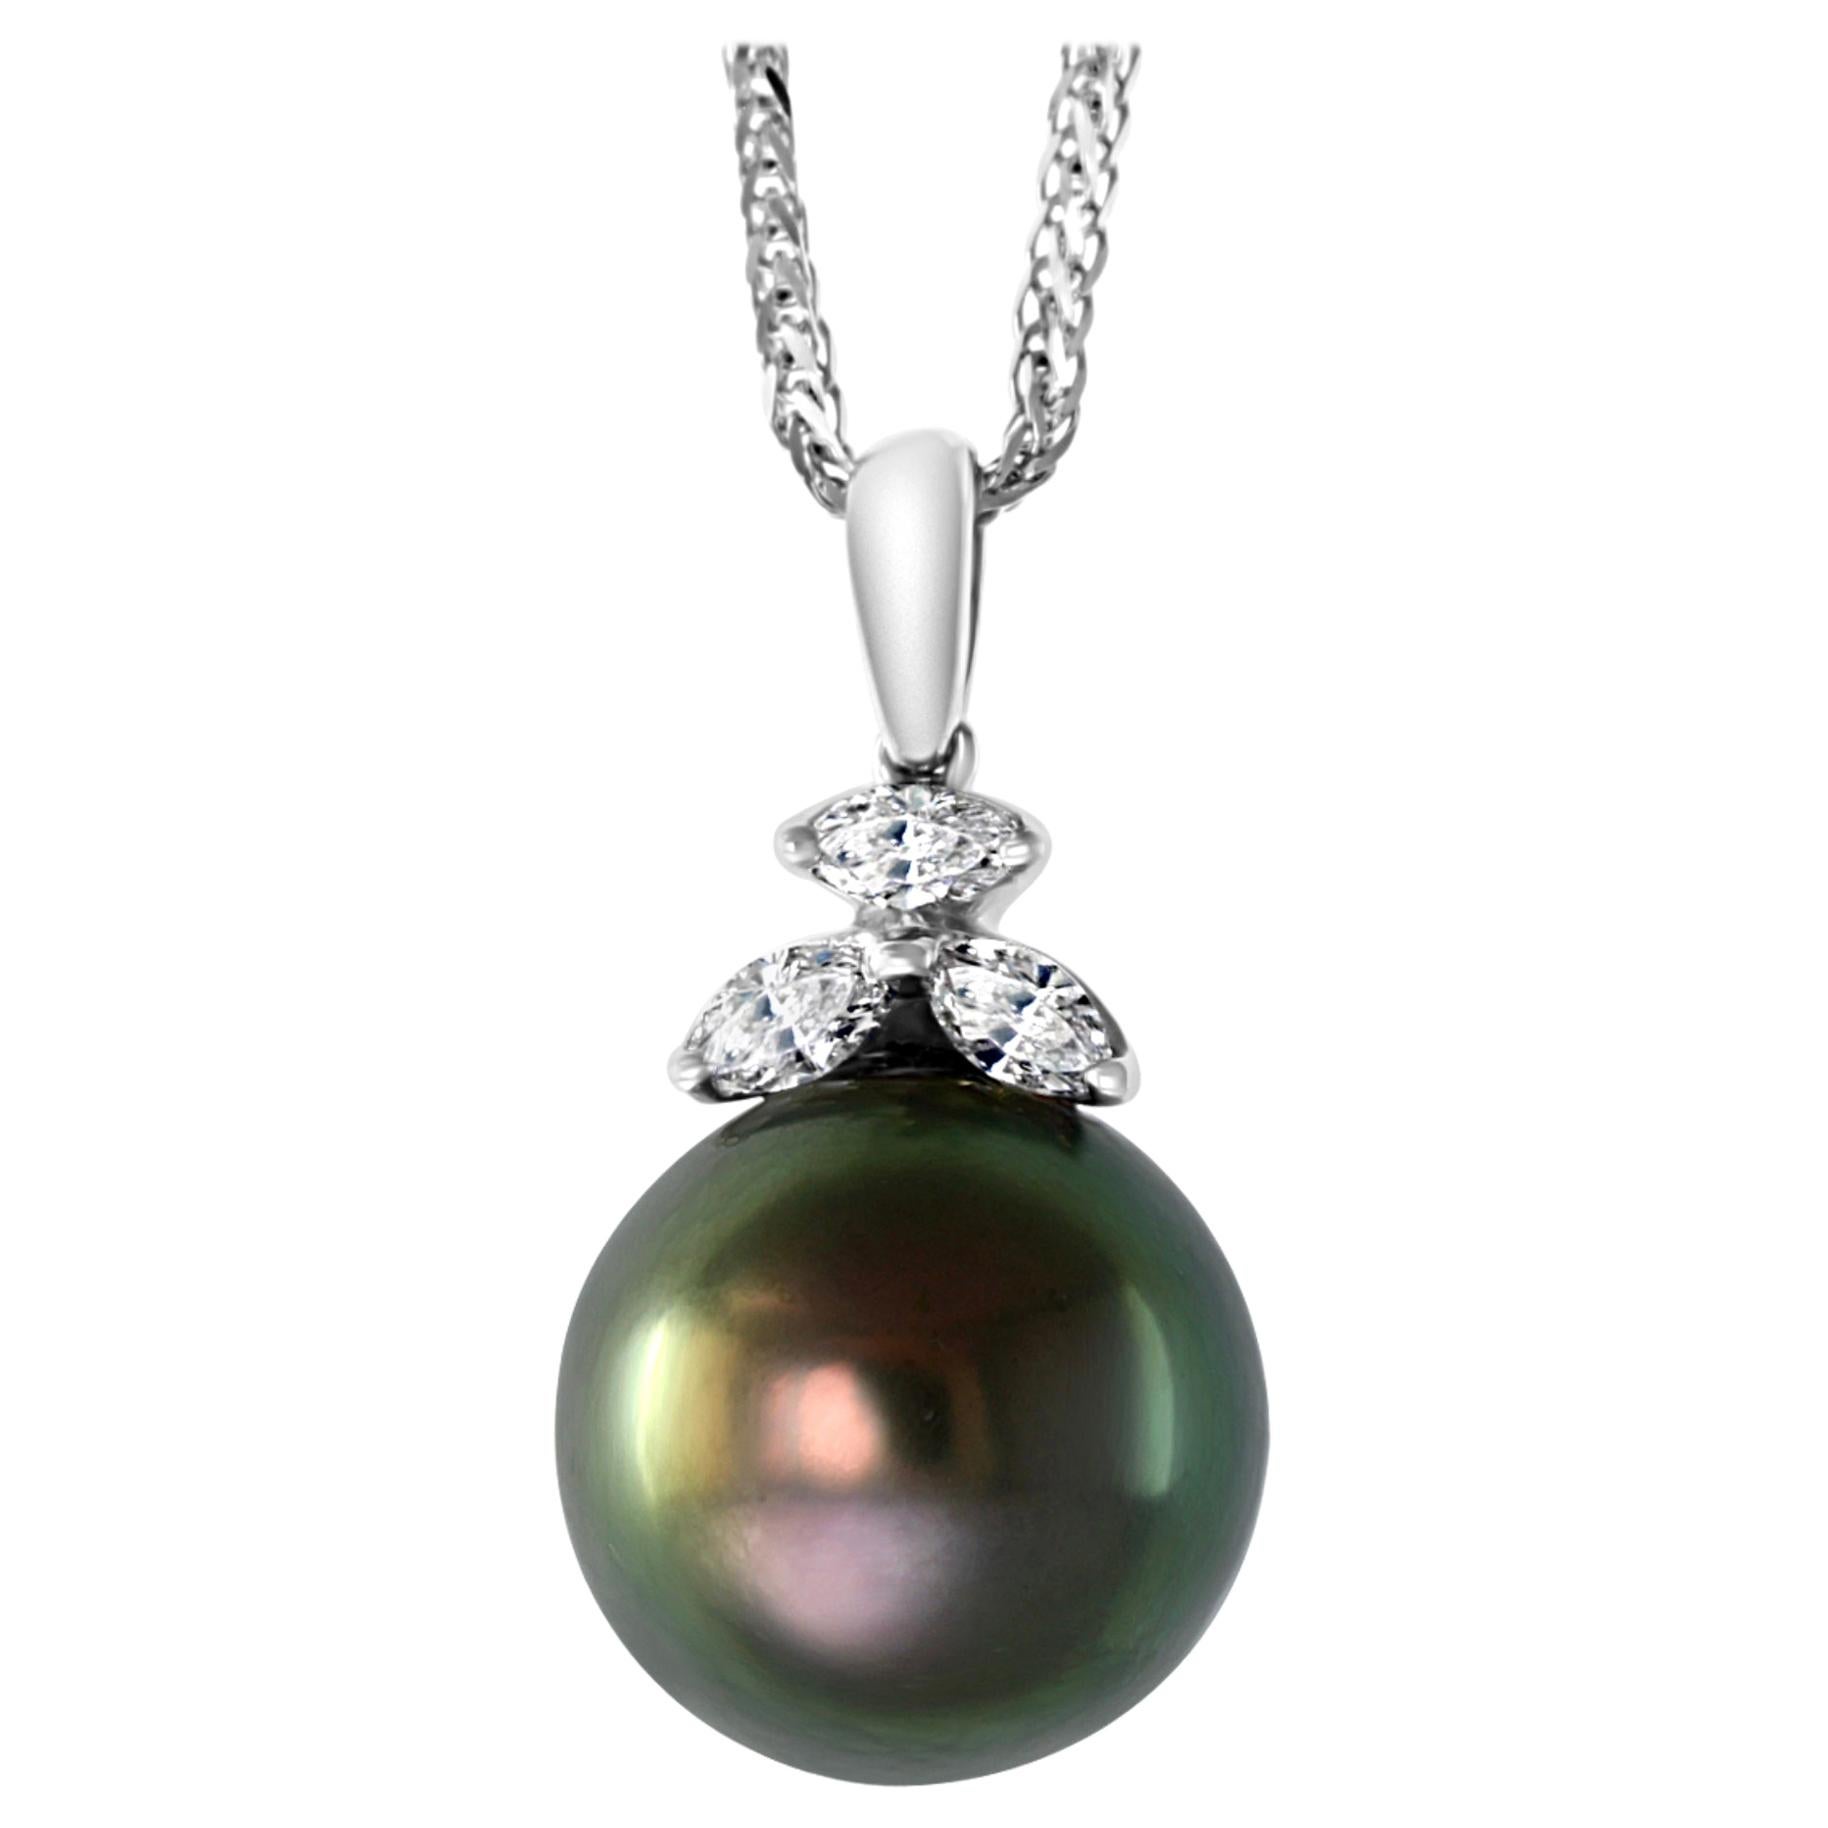 Black Tahitian Pearl and Diamond Pendant or Necklace 18 Karat Gold with Chain